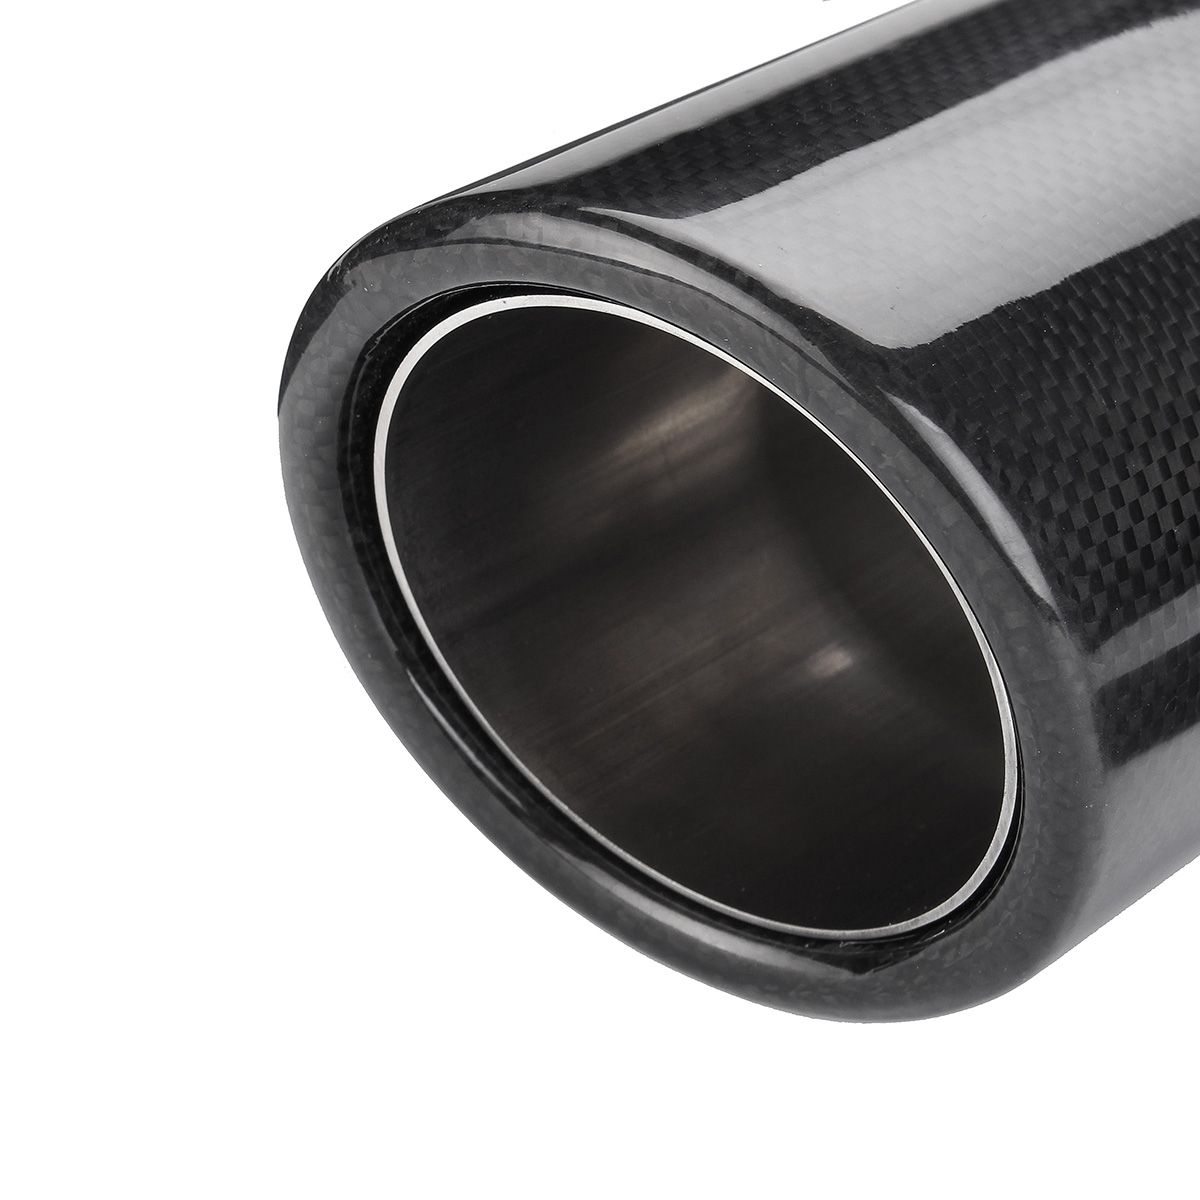 2Inch-Exhaust-Tip-Pipe-Out-Muffler-Tip-Universal-Glossy-Carbon-Fiber-63mm-89mm-1700139